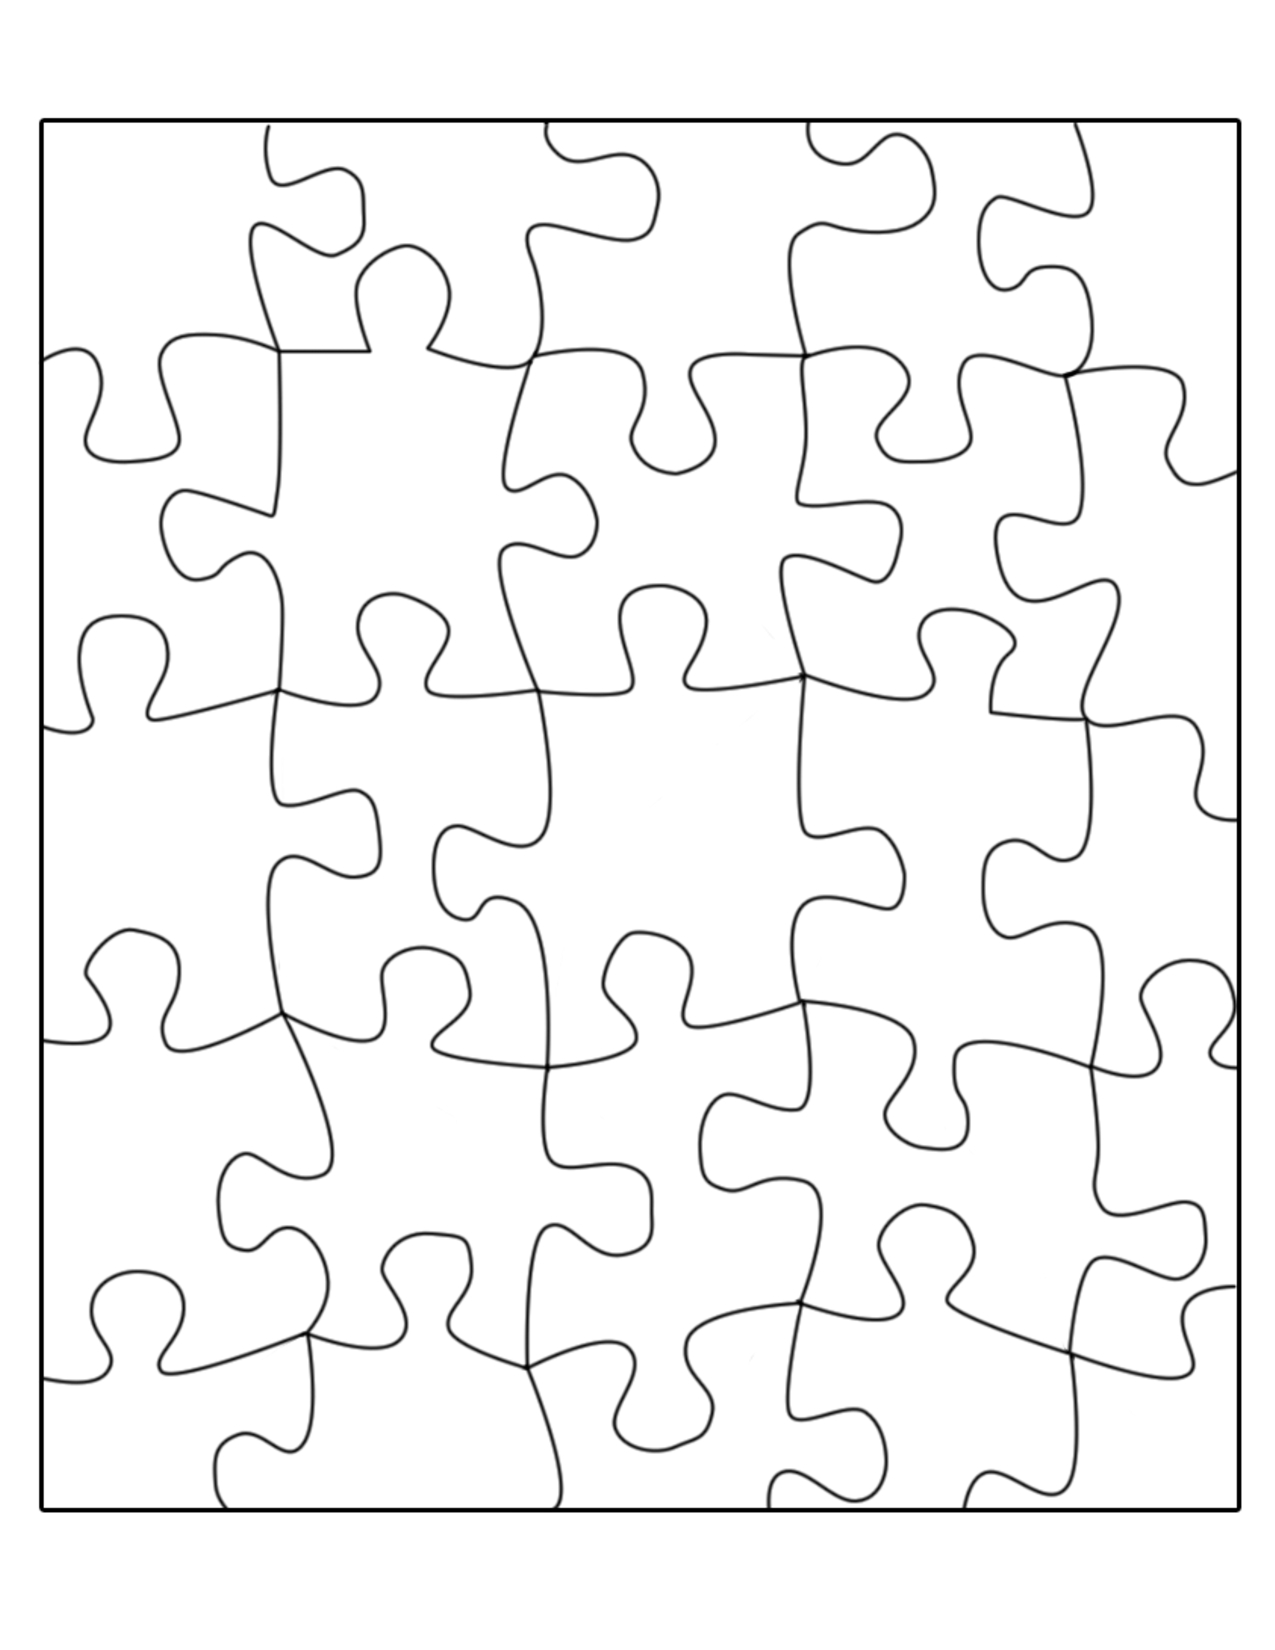 Free Puzzle Template, Download Free Clip Art, Free Clip Art On - Printable Puzzle Blank